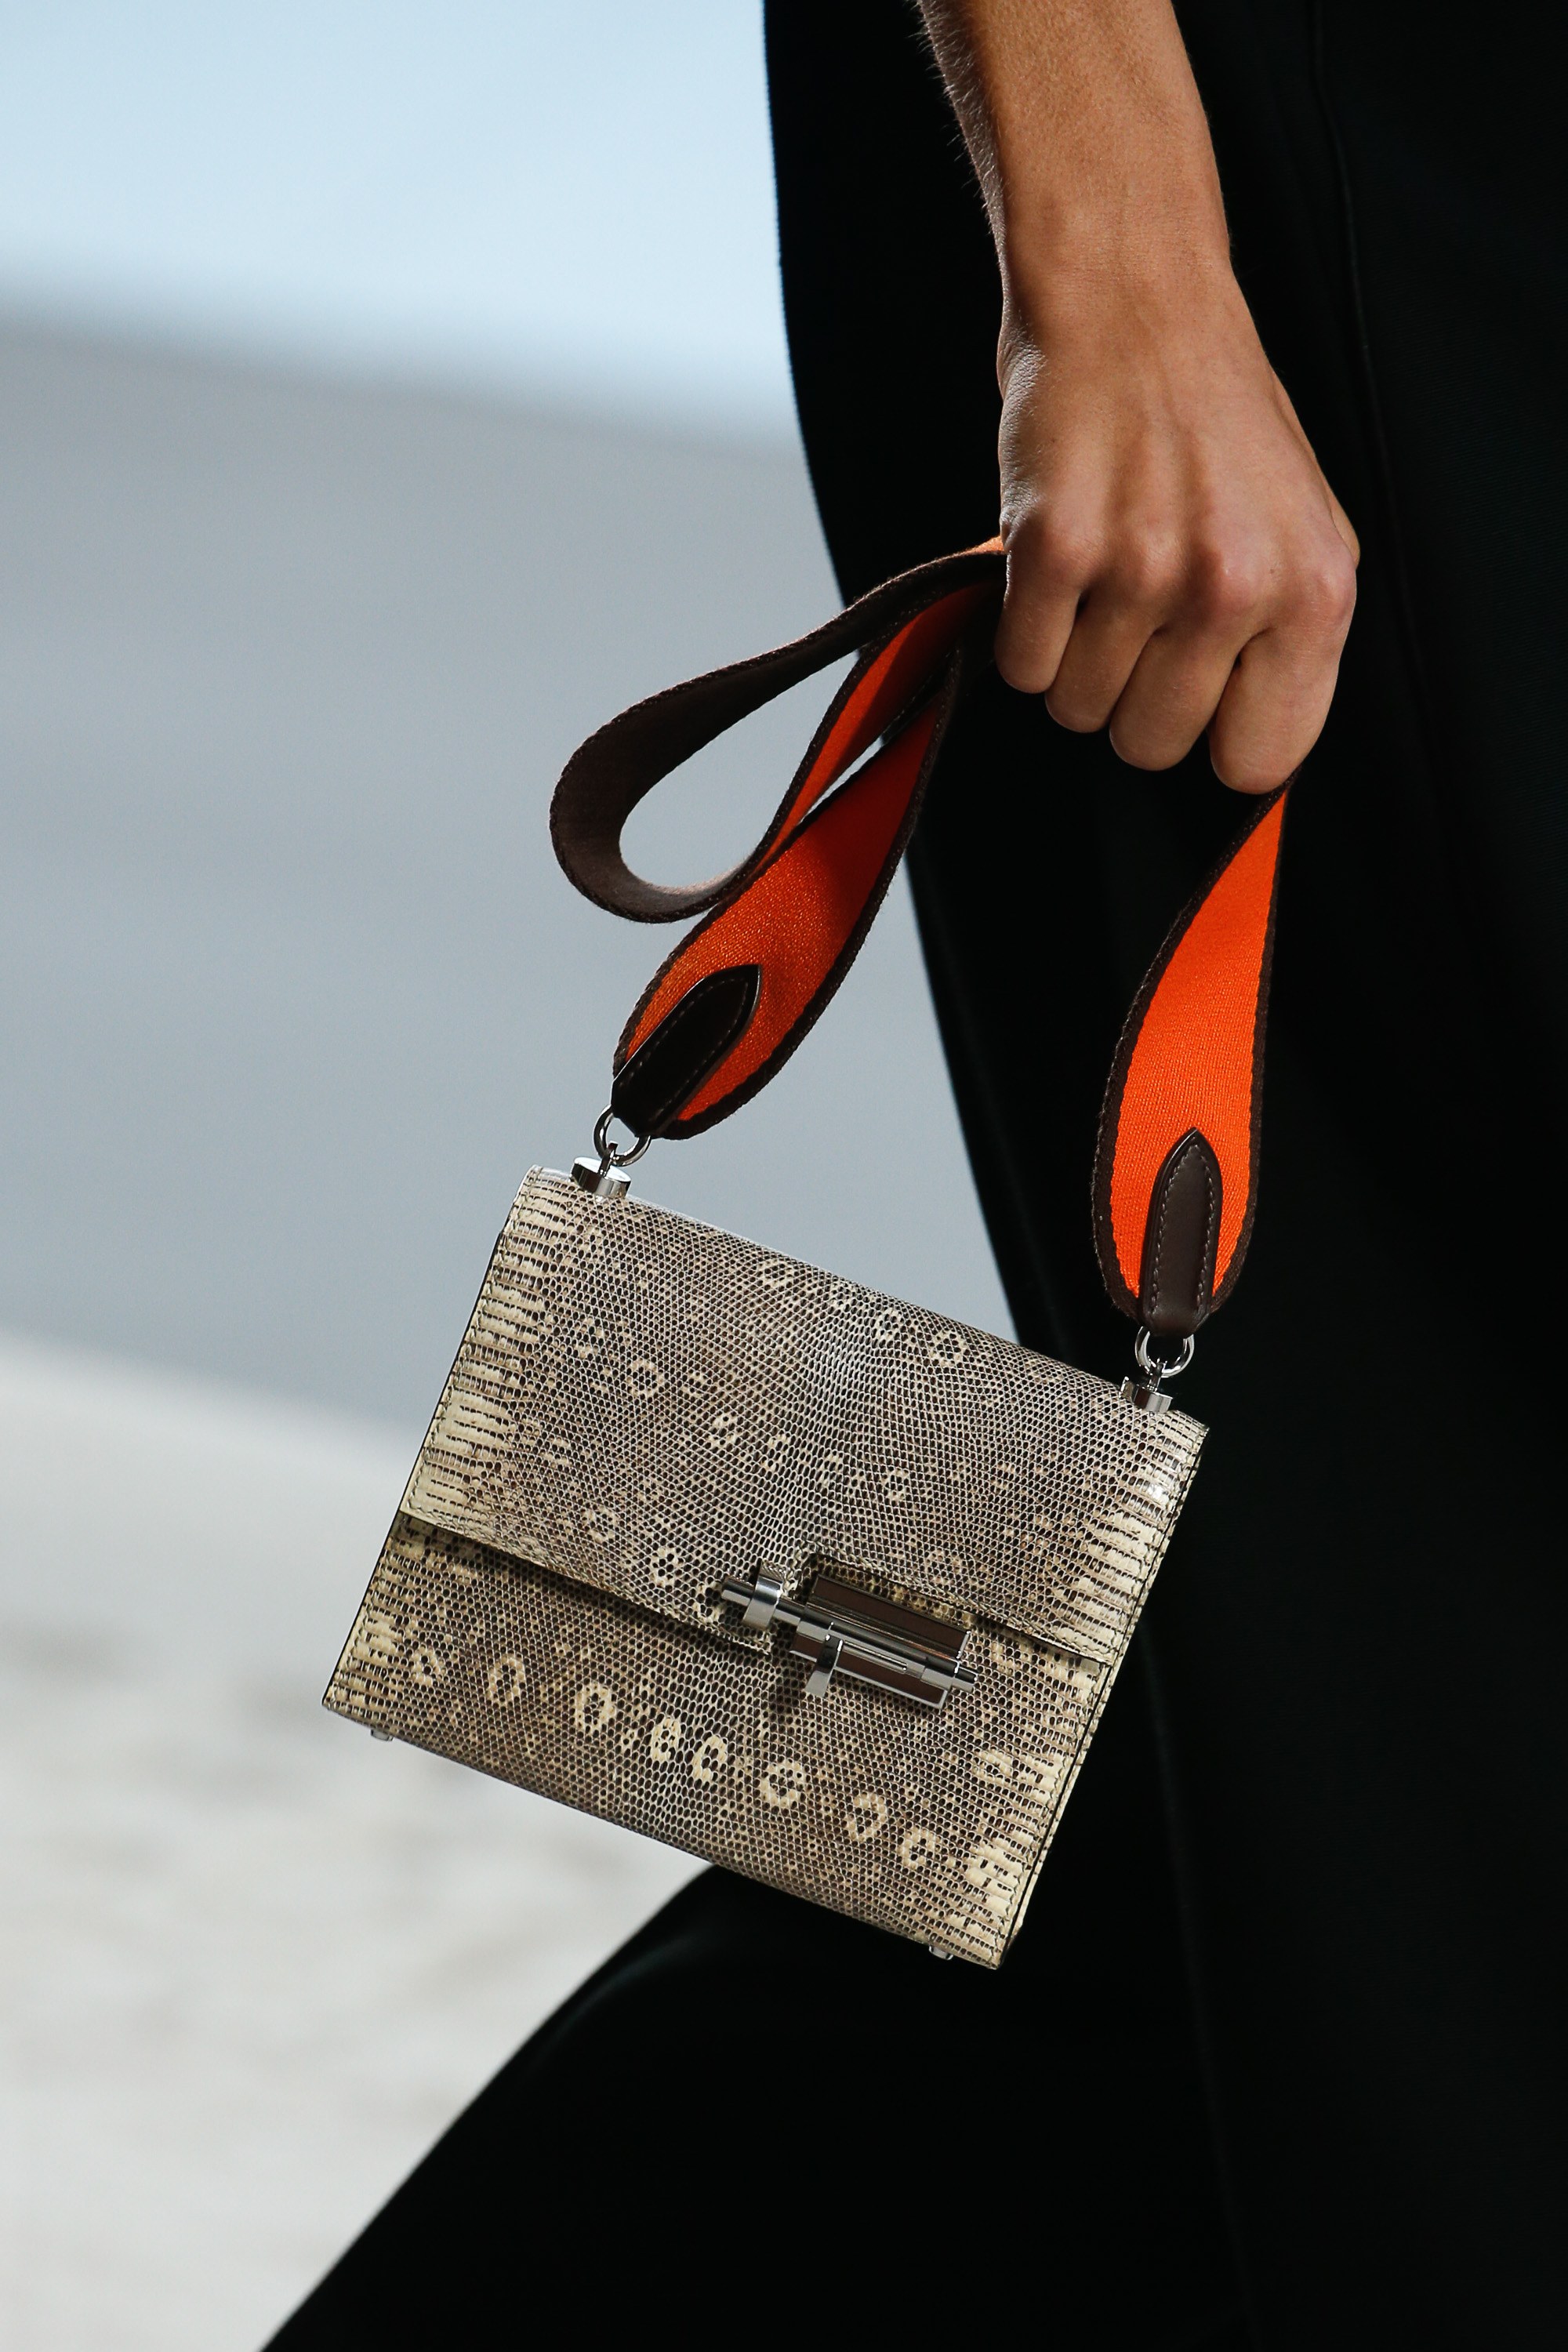 Hermes Spring 2014 Runway Bag Collection - Spotted Fashion